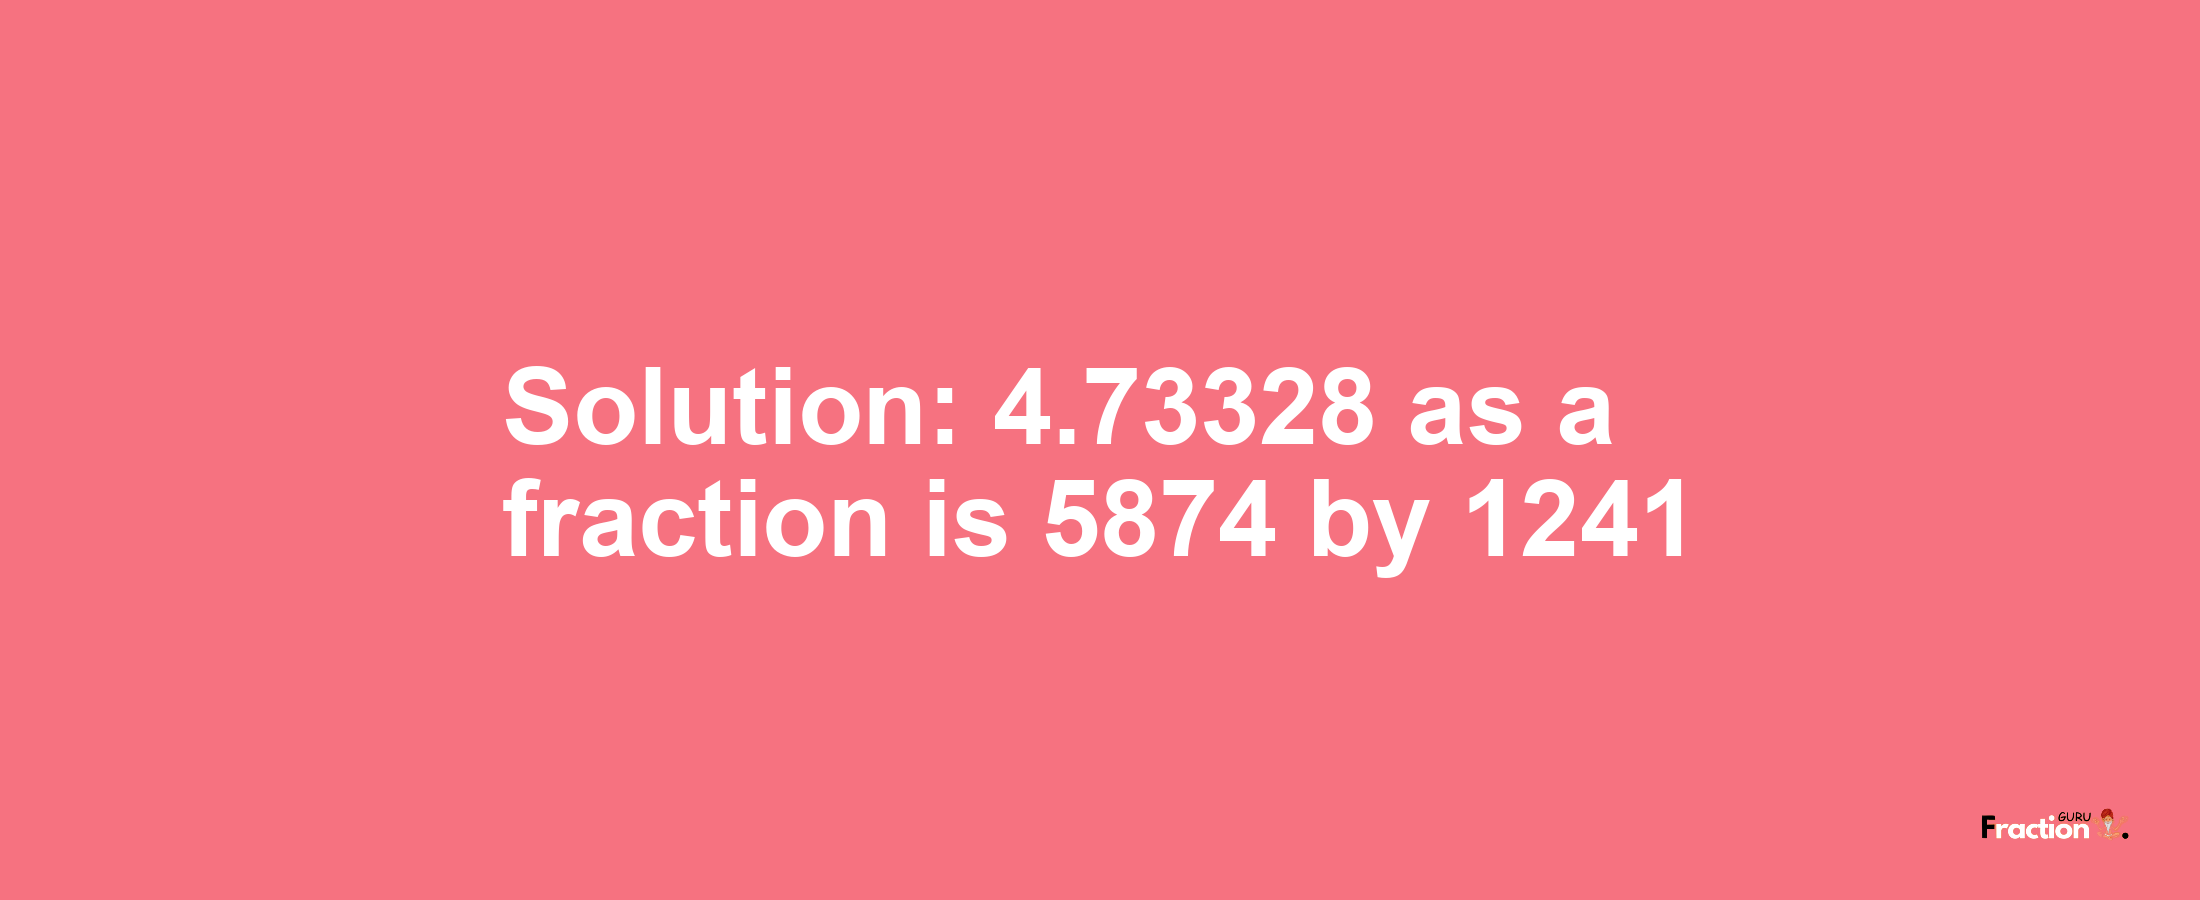 Solution:4.73328 as a fraction is 5874/1241